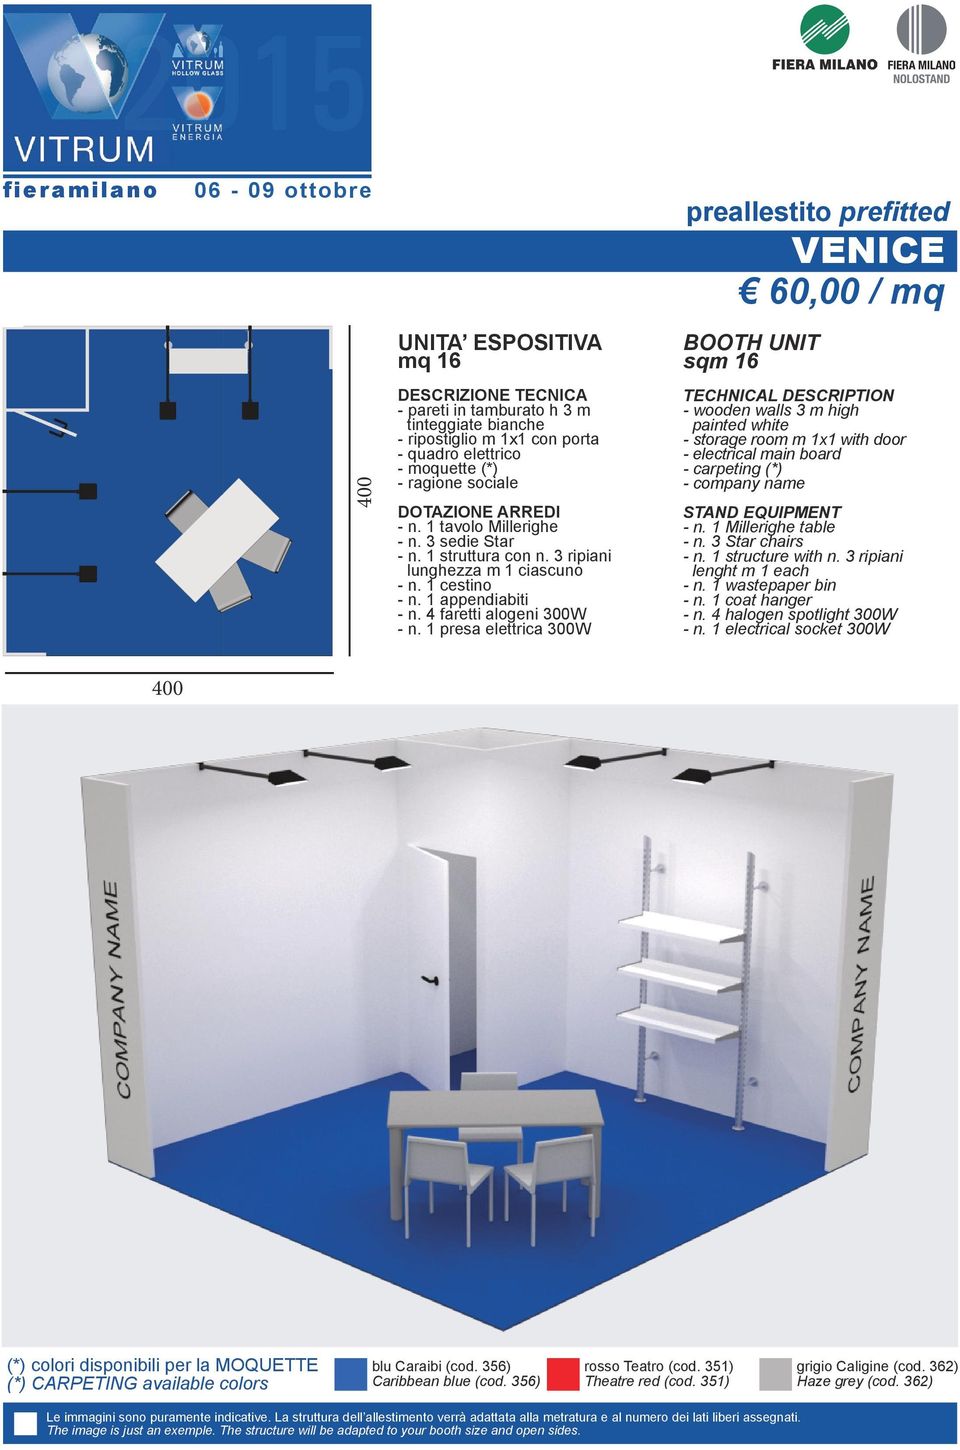 1 presa elettrica 300W TECHNICAL DESCRIPTION - wooden walls 3 m high painted white - storage room m 1x1 with door - electrical main board - carpeting (*) - company name STAND EQUIPMENT - n.